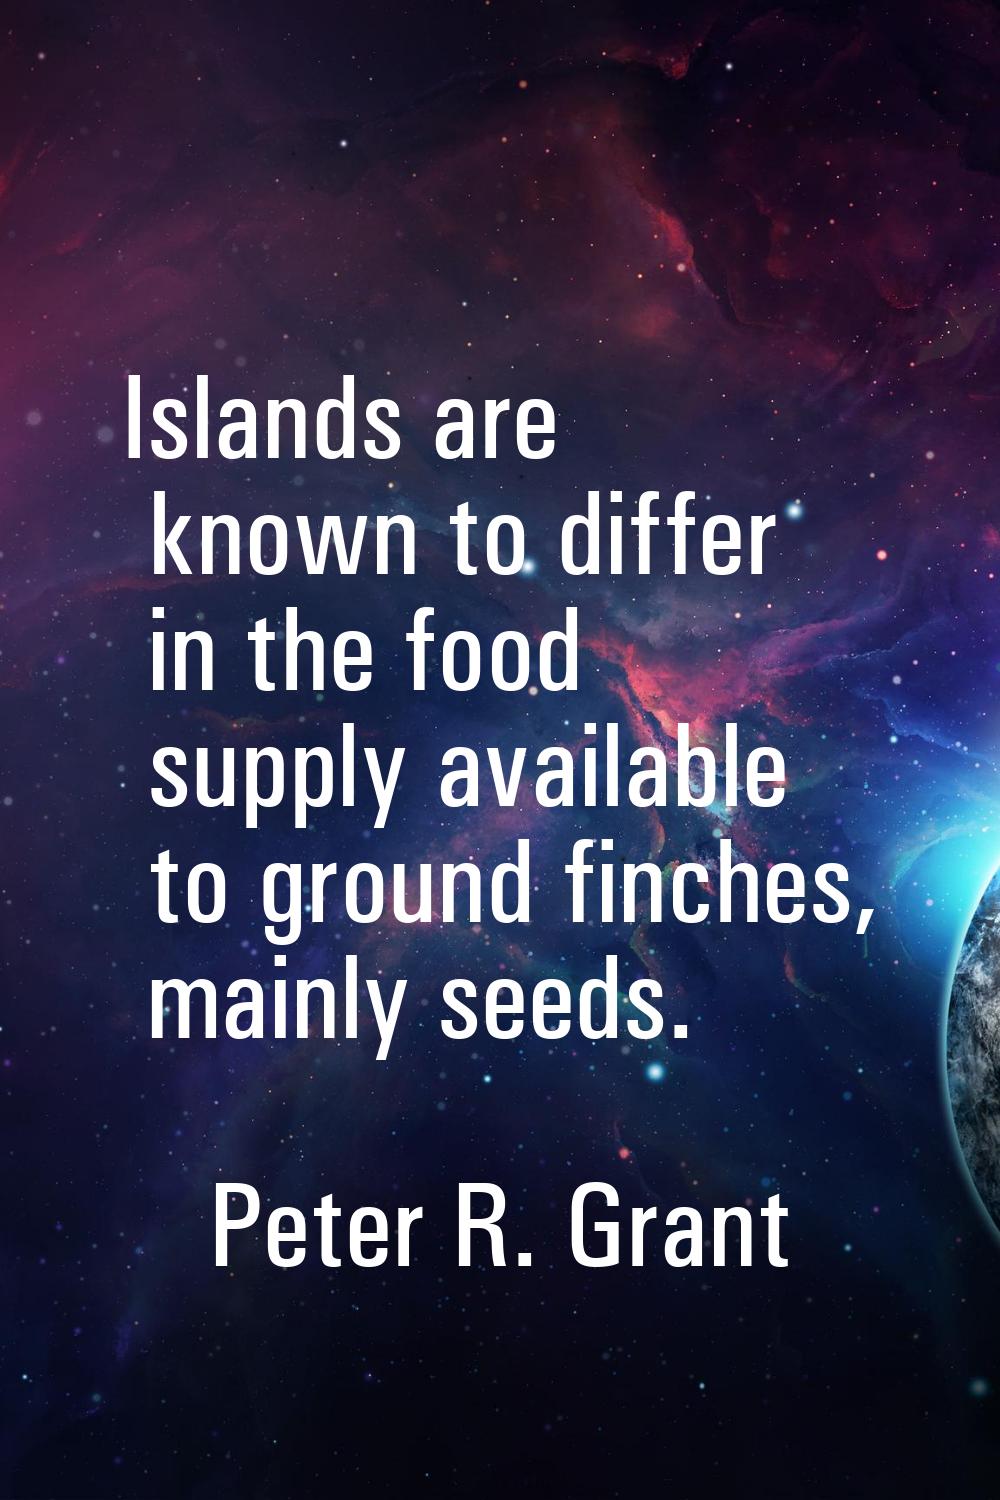 Islands are known to differ in the food supply available to ground finches, mainly seeds.